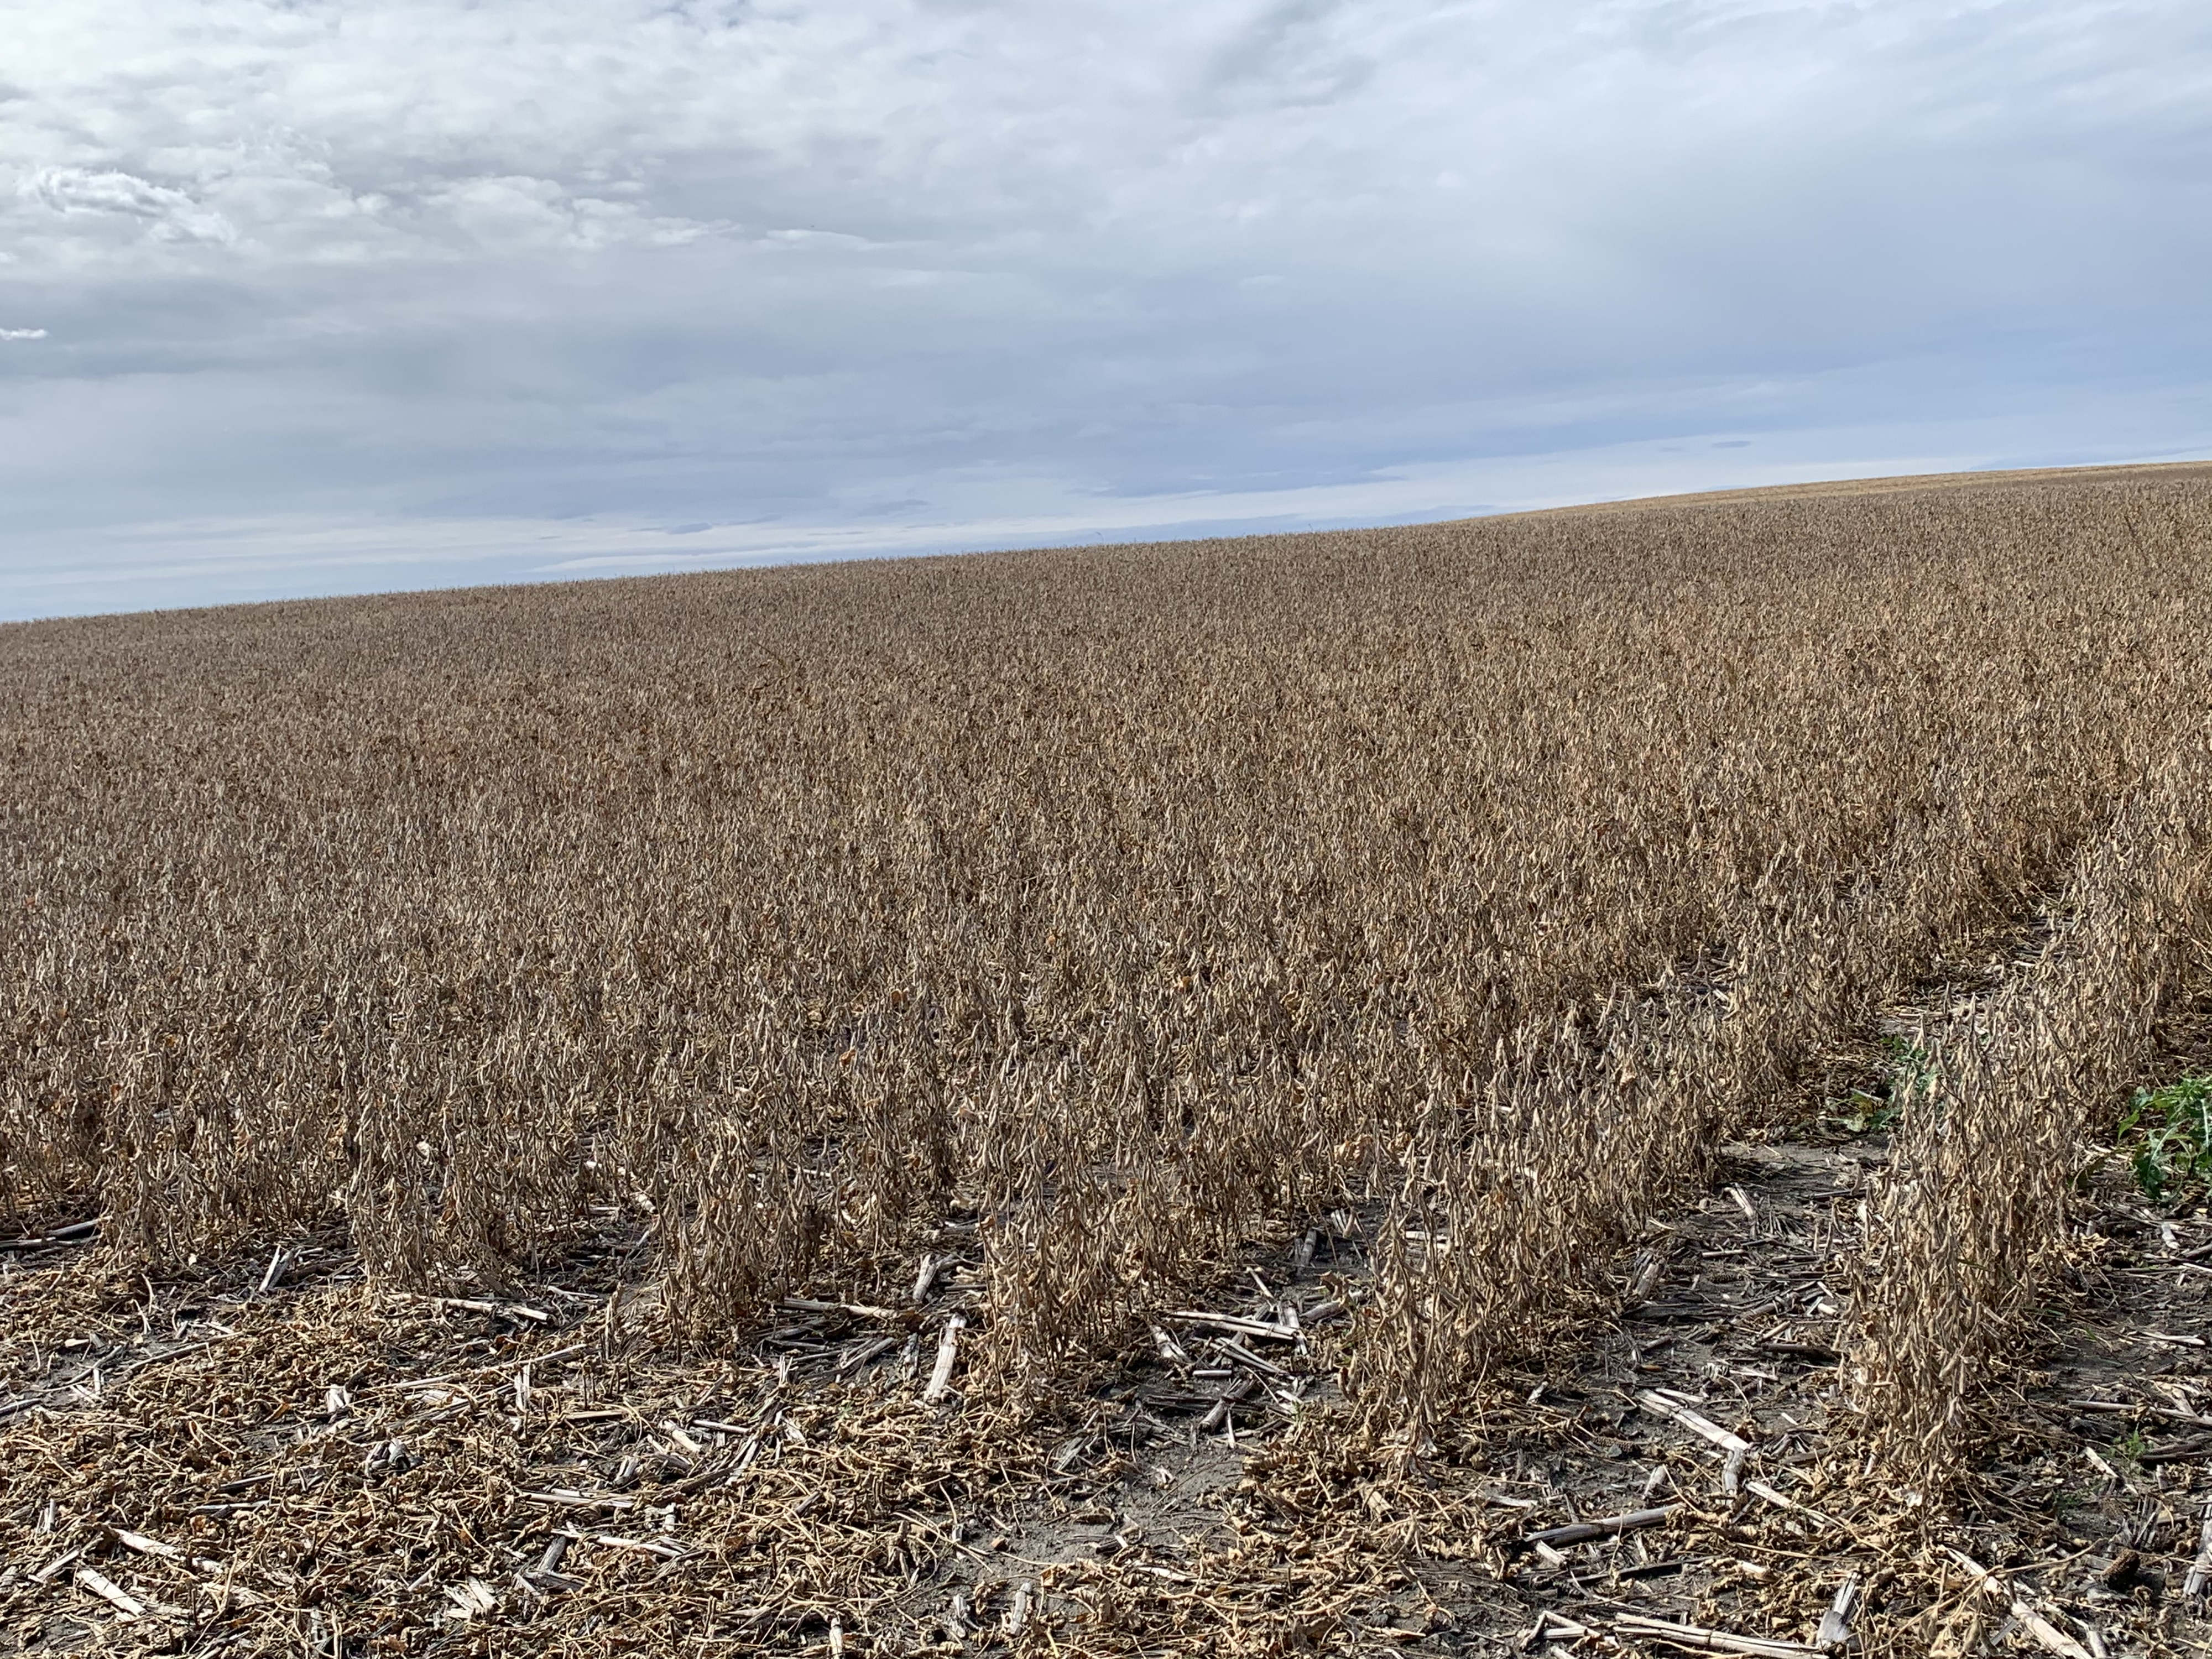 Morning Ag News, March 18, 2021: 2021 soybean acreage could be record setting